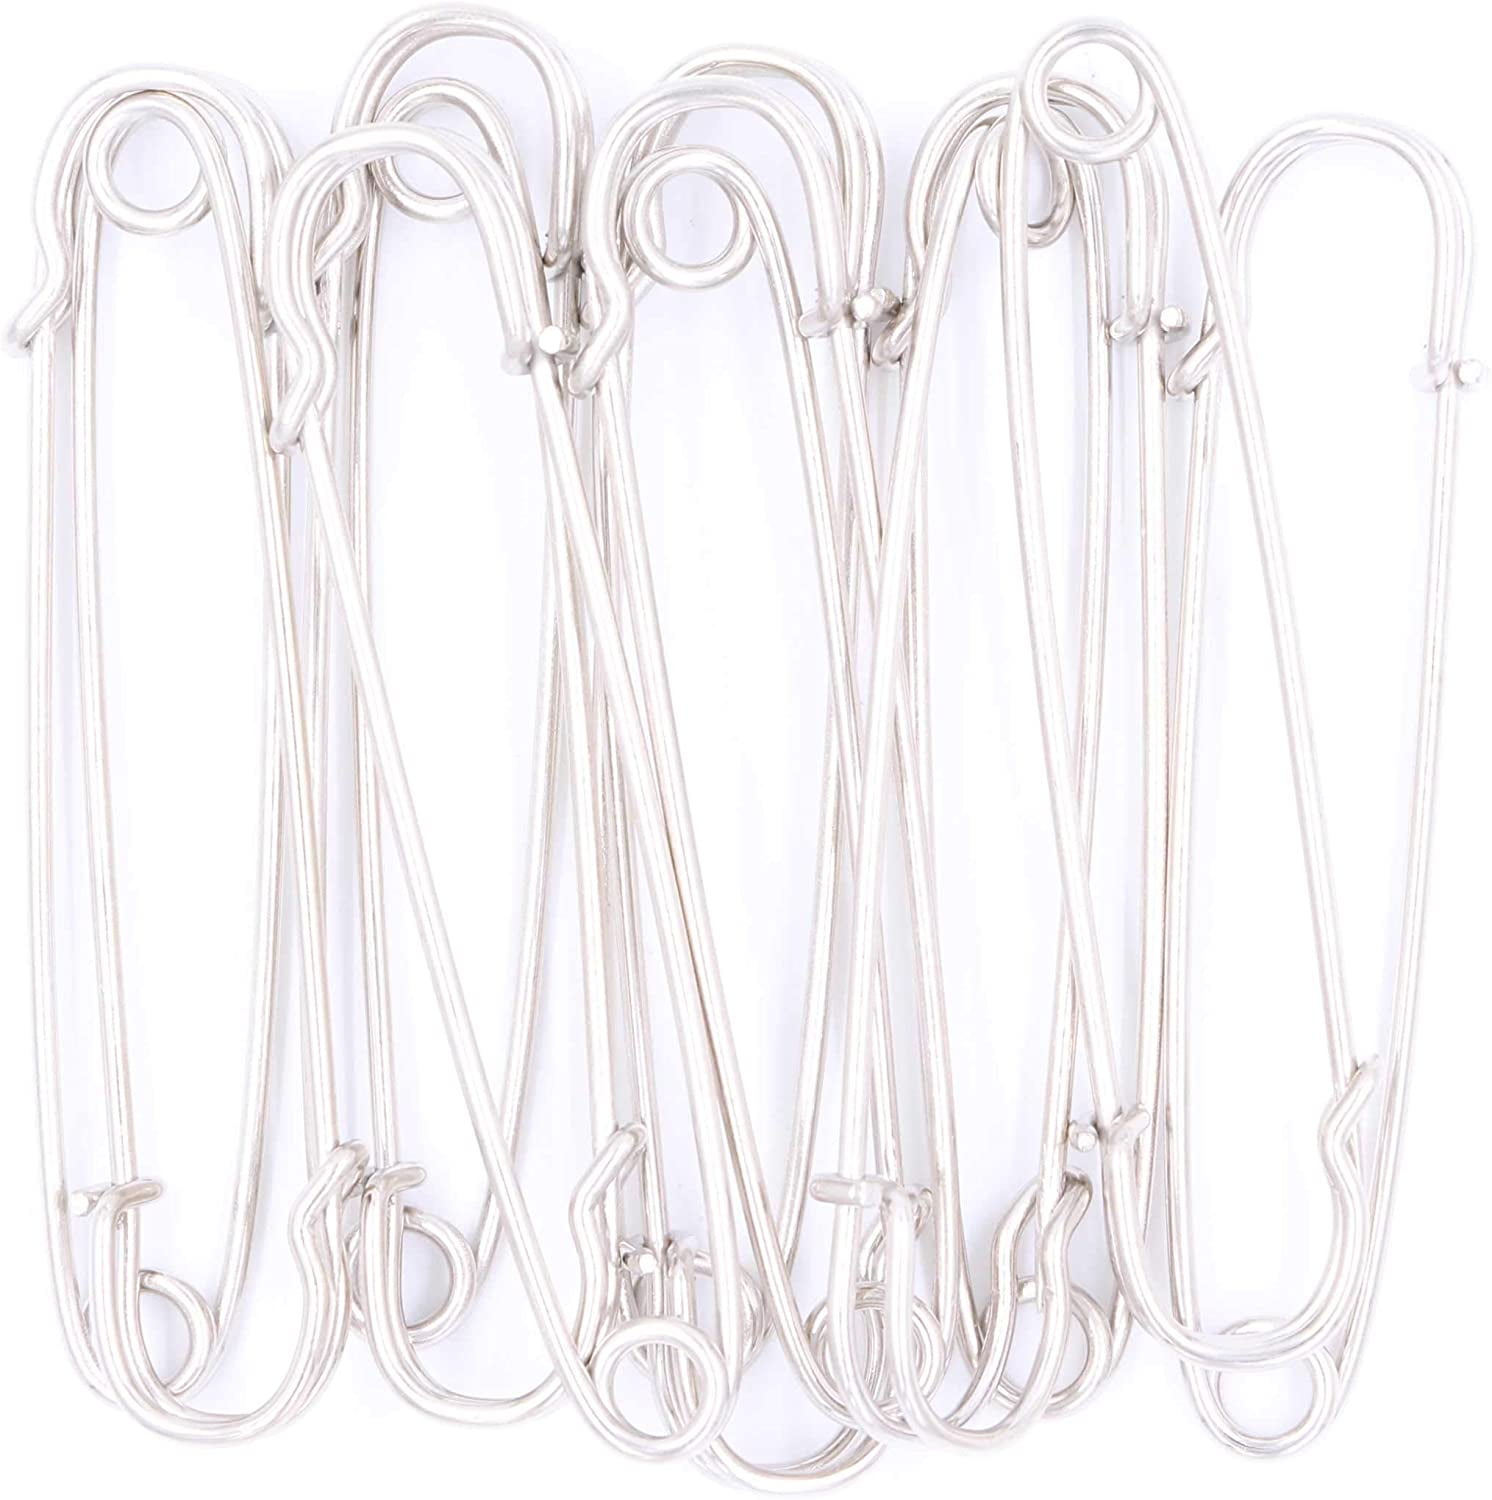 Honbay 20PCS 3Inch Heavy Duty Extra Large Safety Pins for Blankets, Skirts,  Kilts, Crafts (Silver)